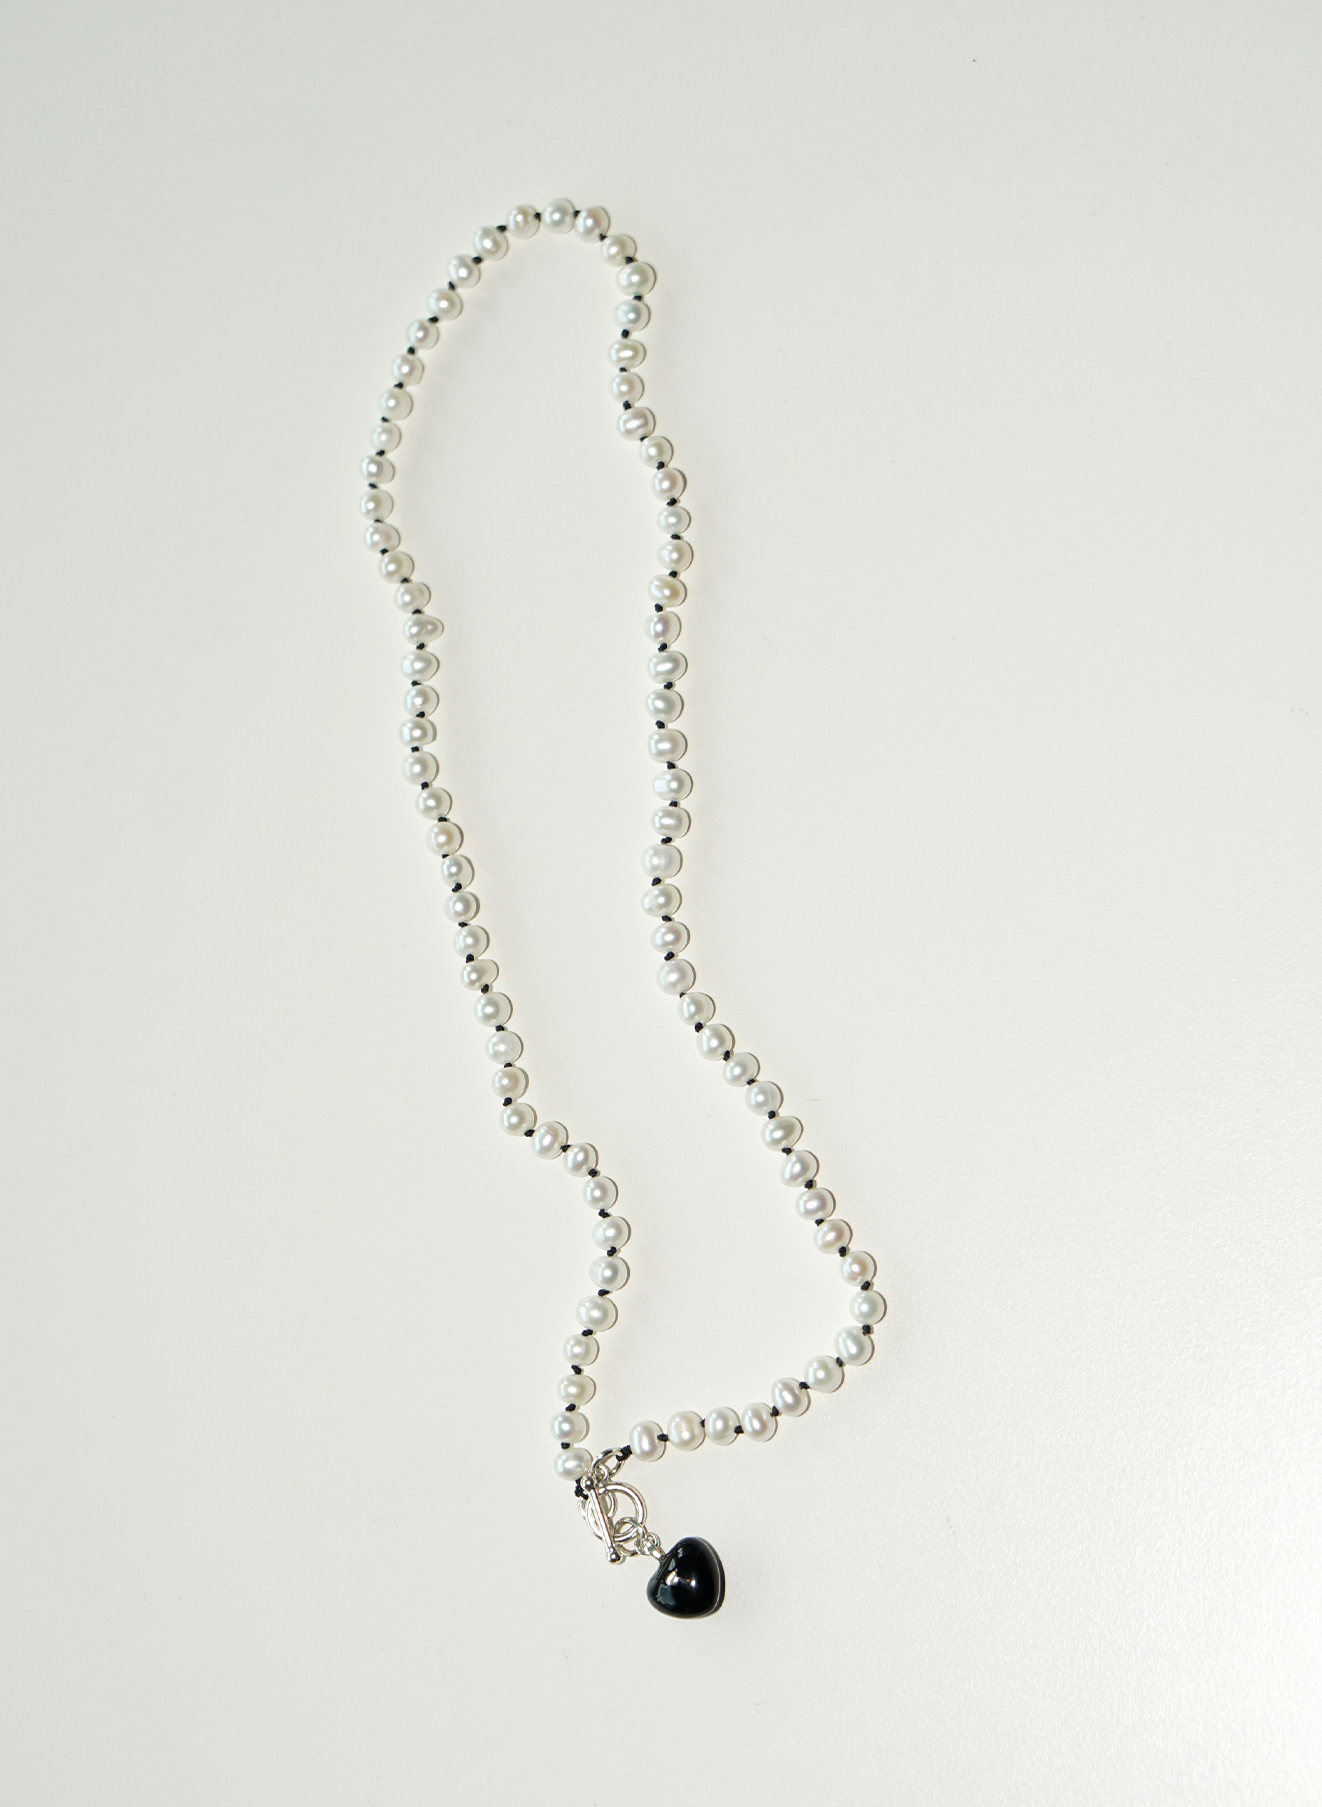 Love freshwater pearl necklace